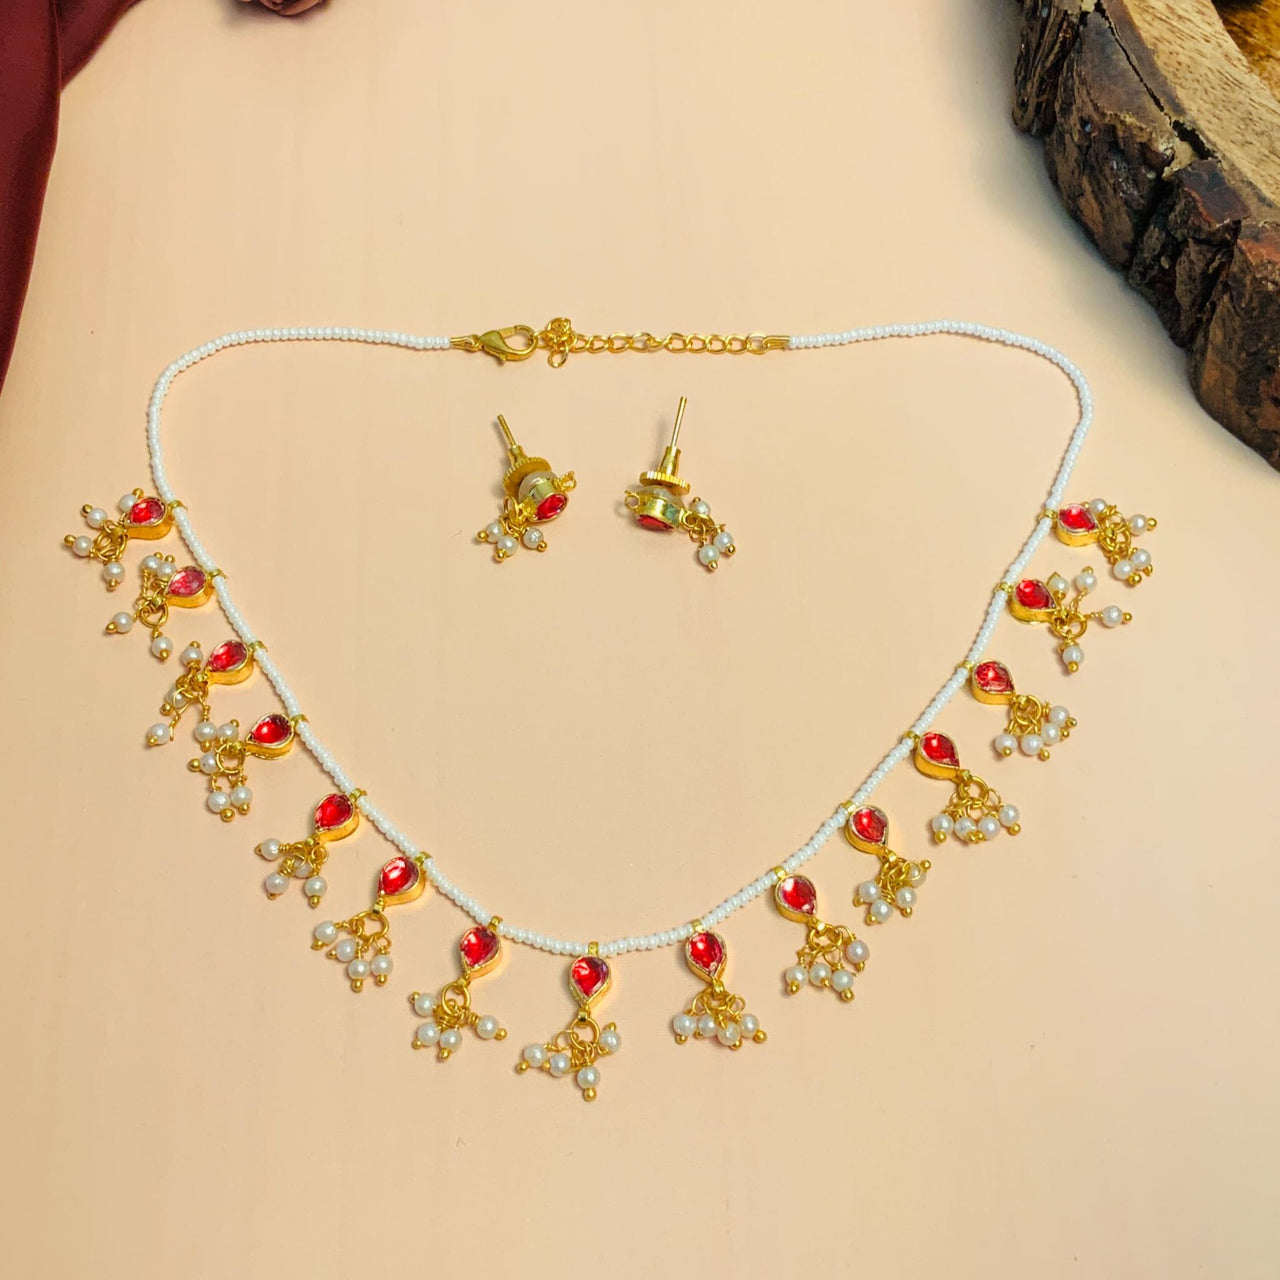 Impressive Gold Plated Kundan Necklace With Beautiful Pearls